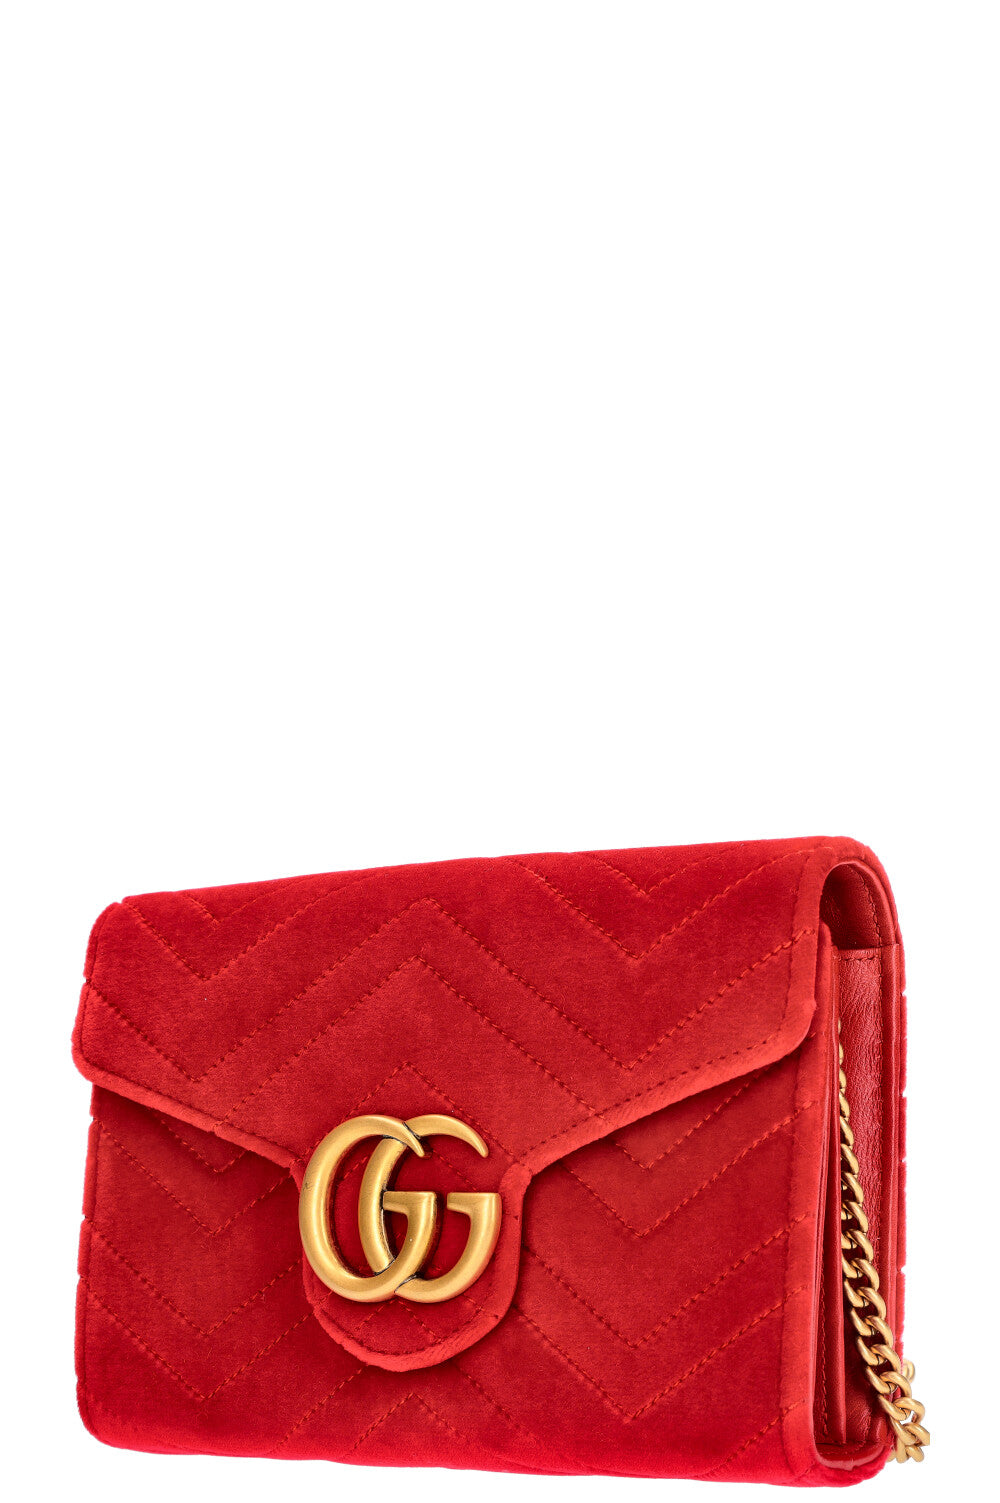 Gucci Dionysus GG Signature Small Handbag Red Velvet Black Patent Leather |  Blinded Society